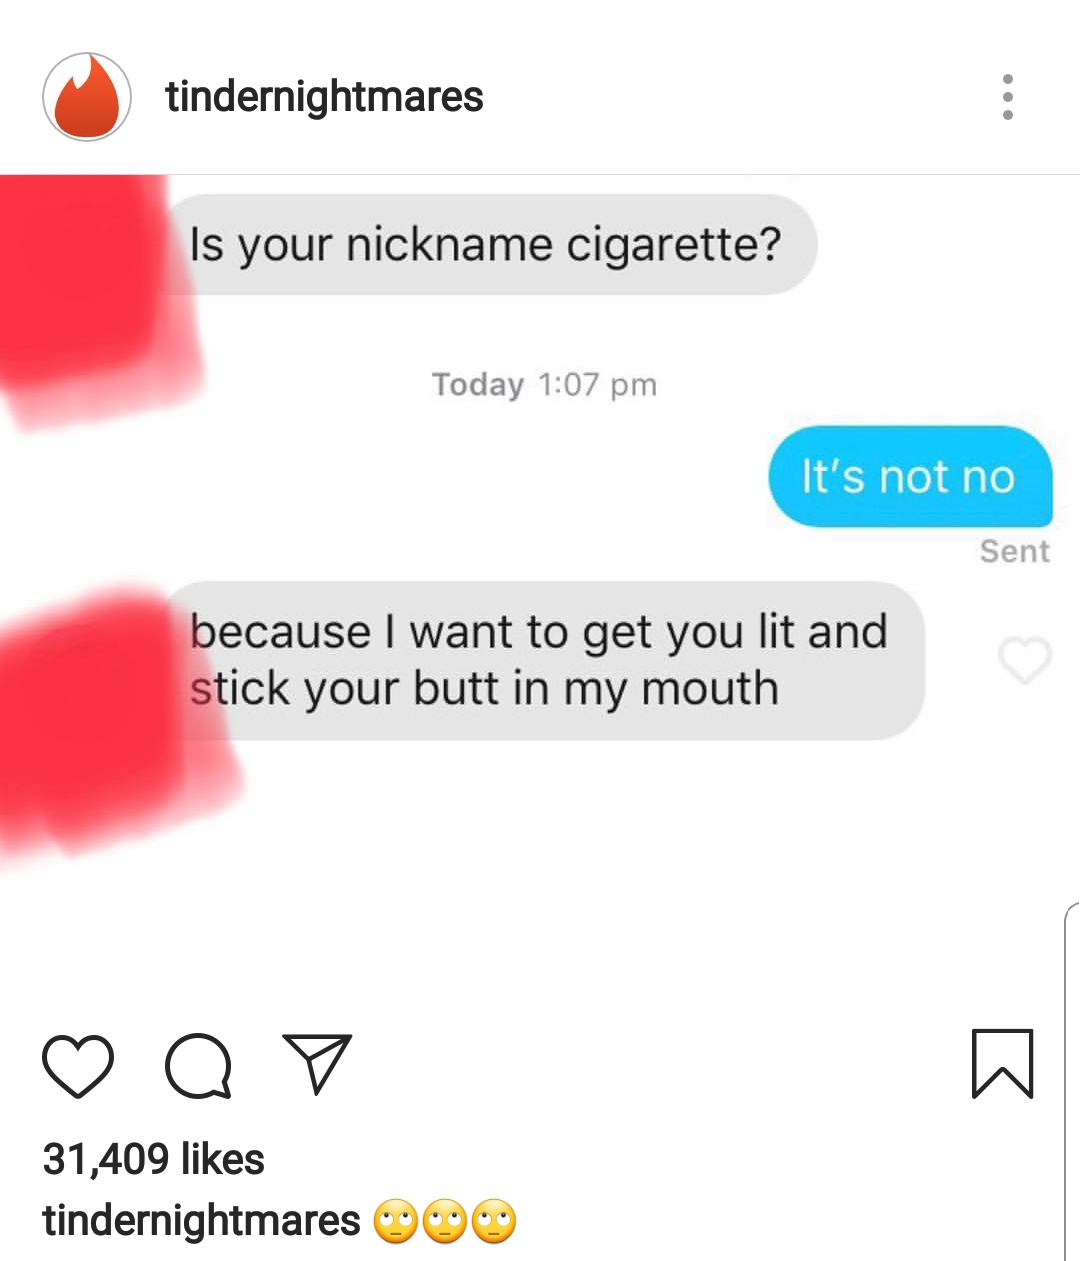 memes - tindernightmares Is your nickname cigarette? Today It's not no Sent because I want to get you lit and stick your butt in my mouth Dqd 31,409 tindernightmares